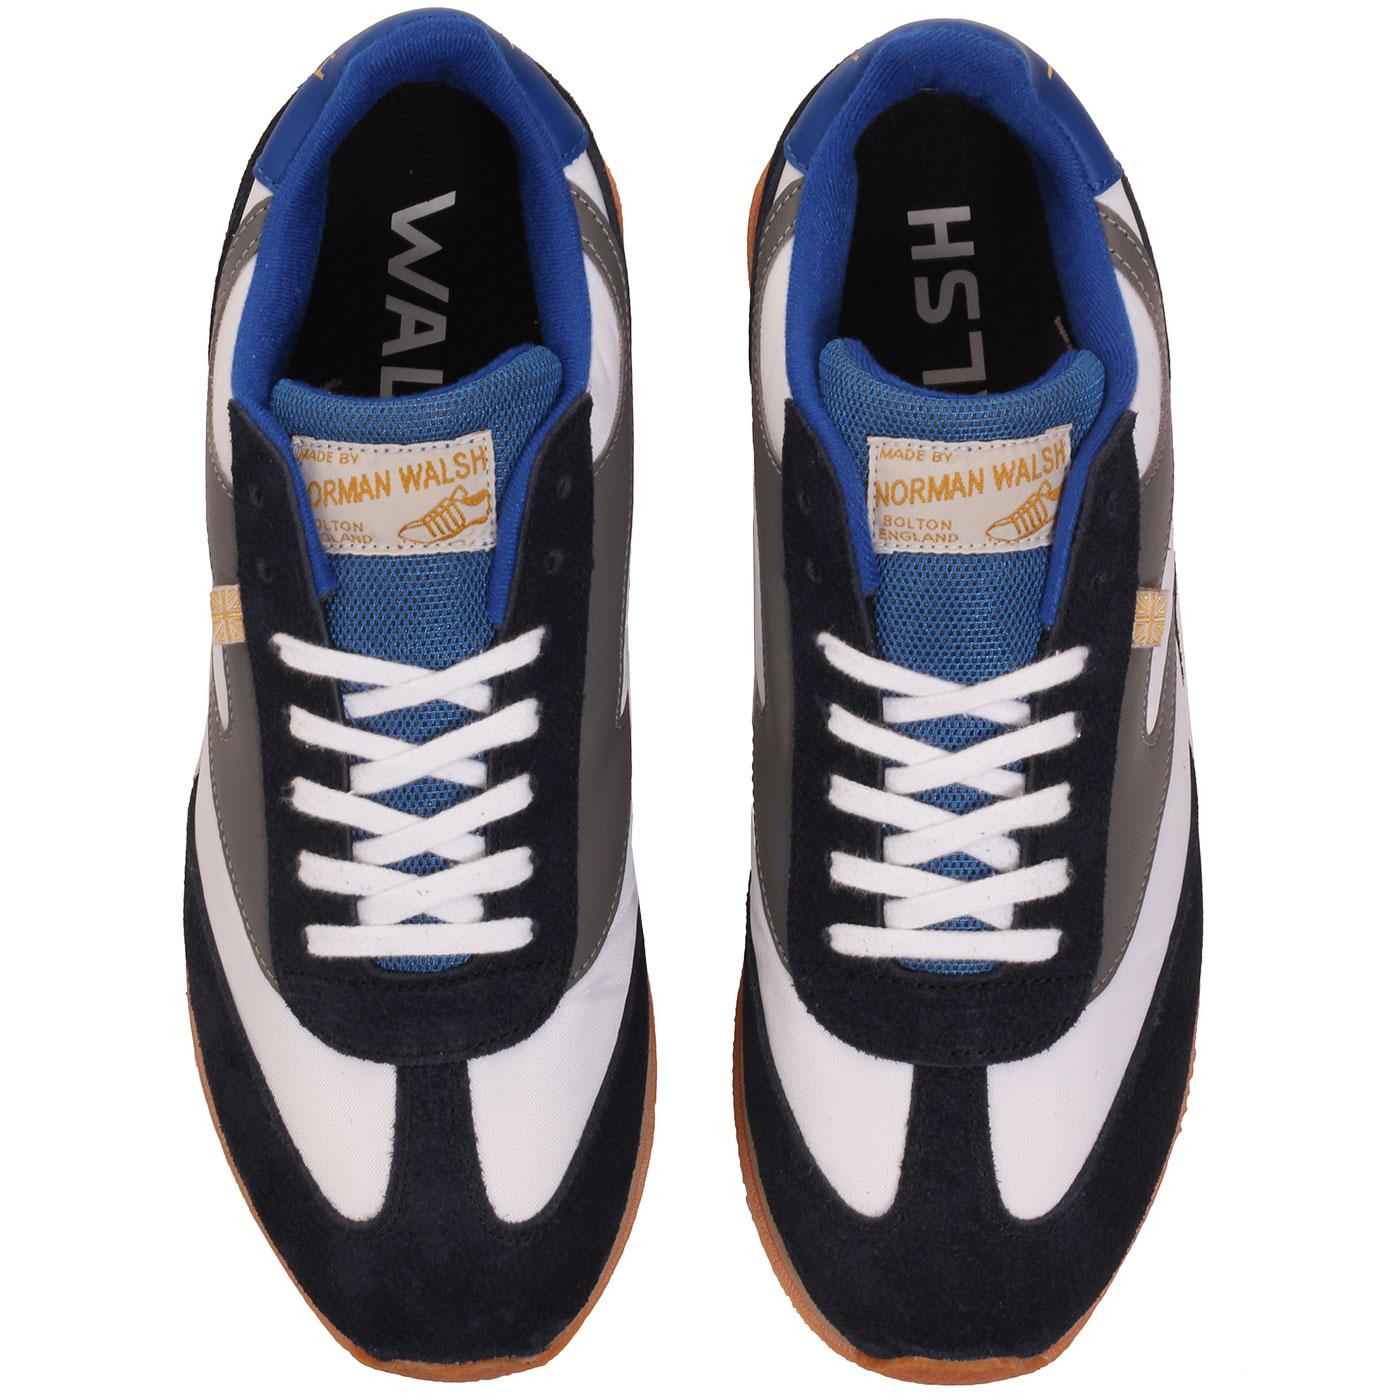 WALSH Fierce + Made in England Retro Trainers White/Navy